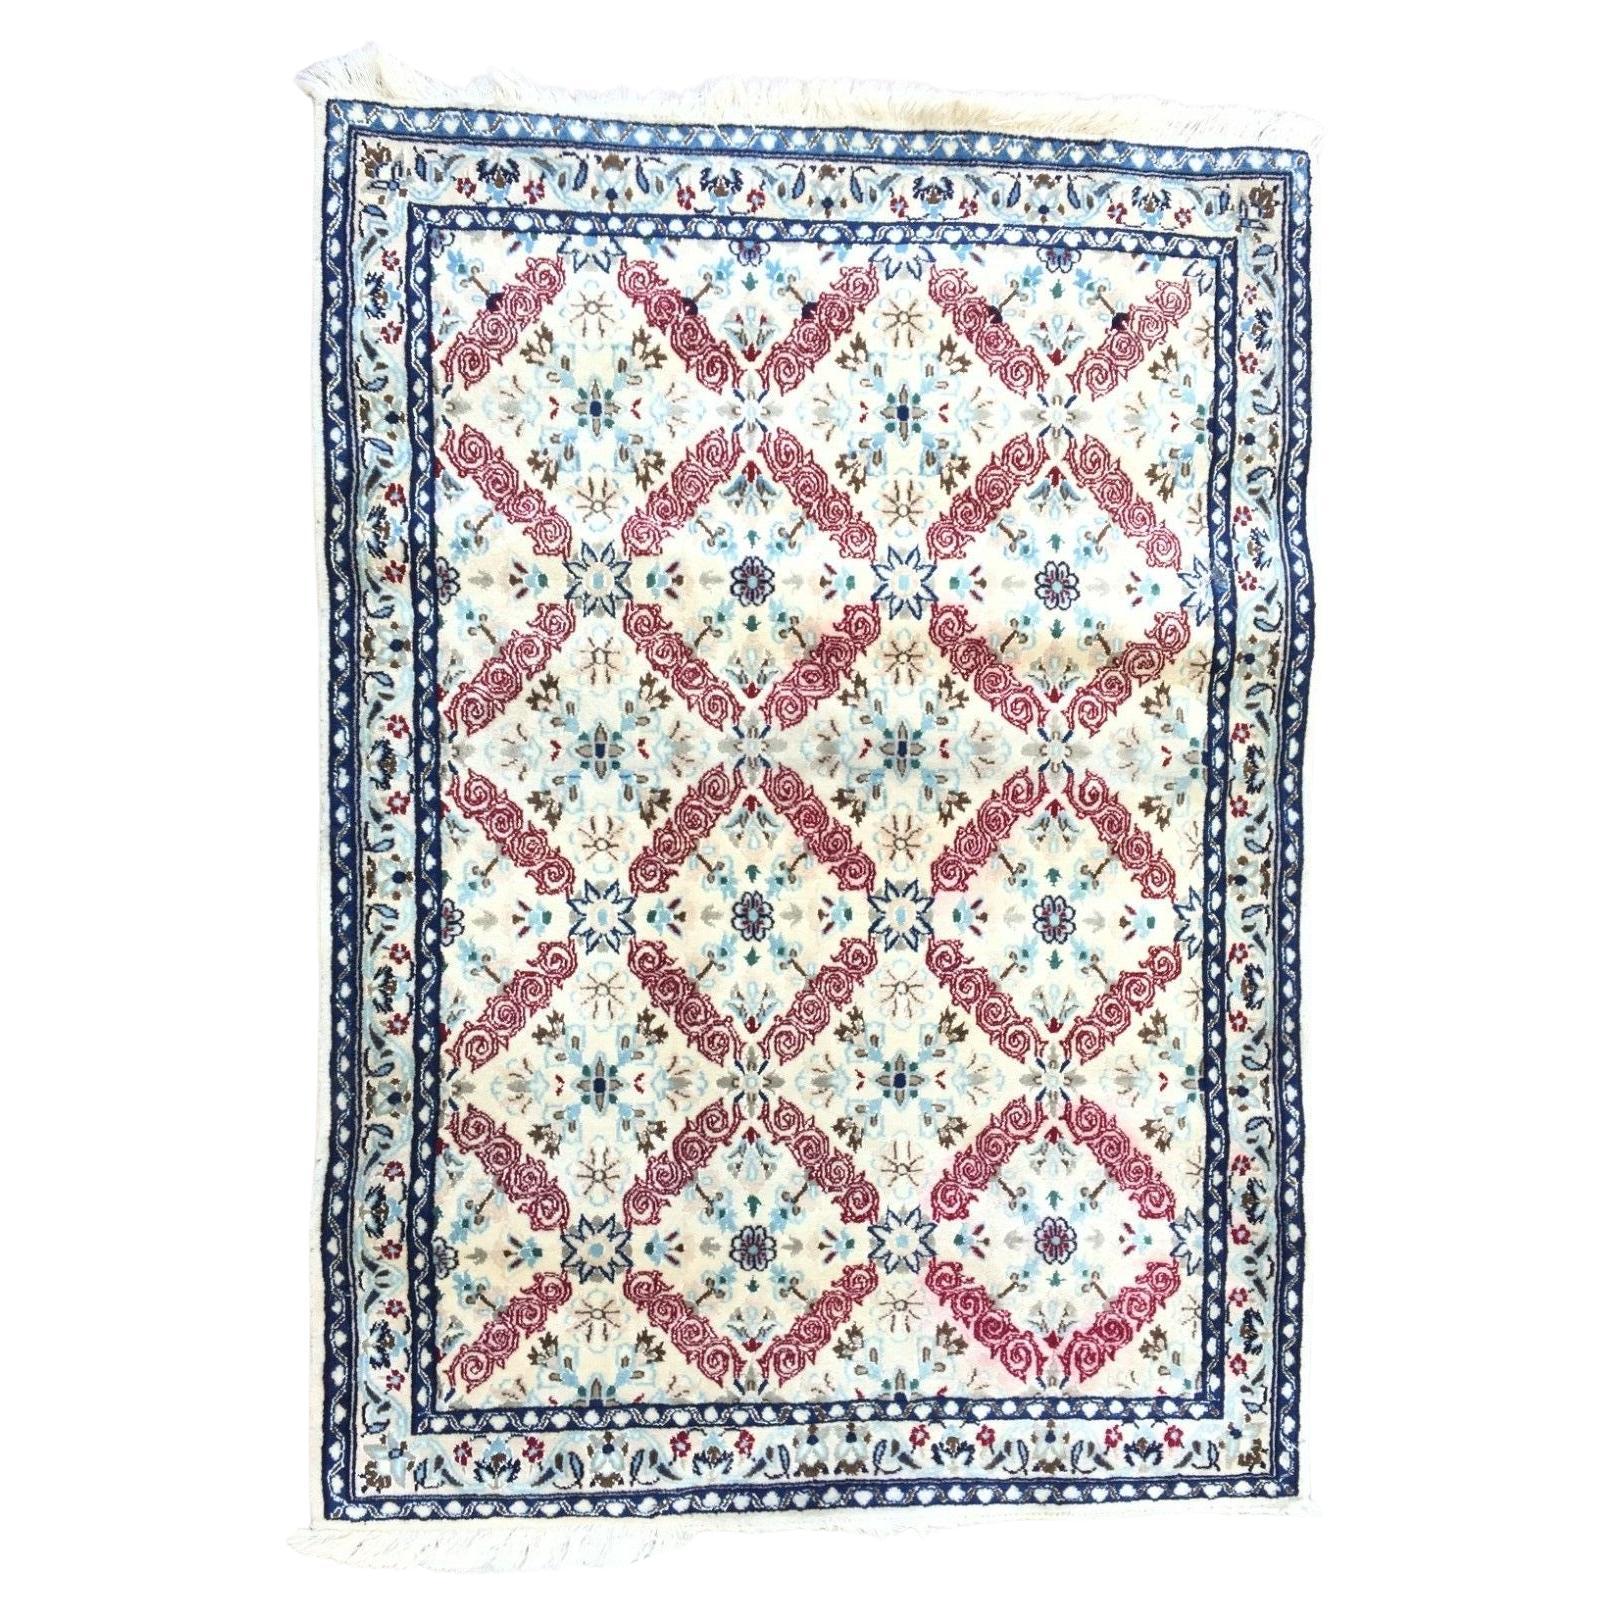 Handmade Vintage Persian Style Nain Rug With Silk 2.6' x 3.8', 1960s - 1W15 For Sale